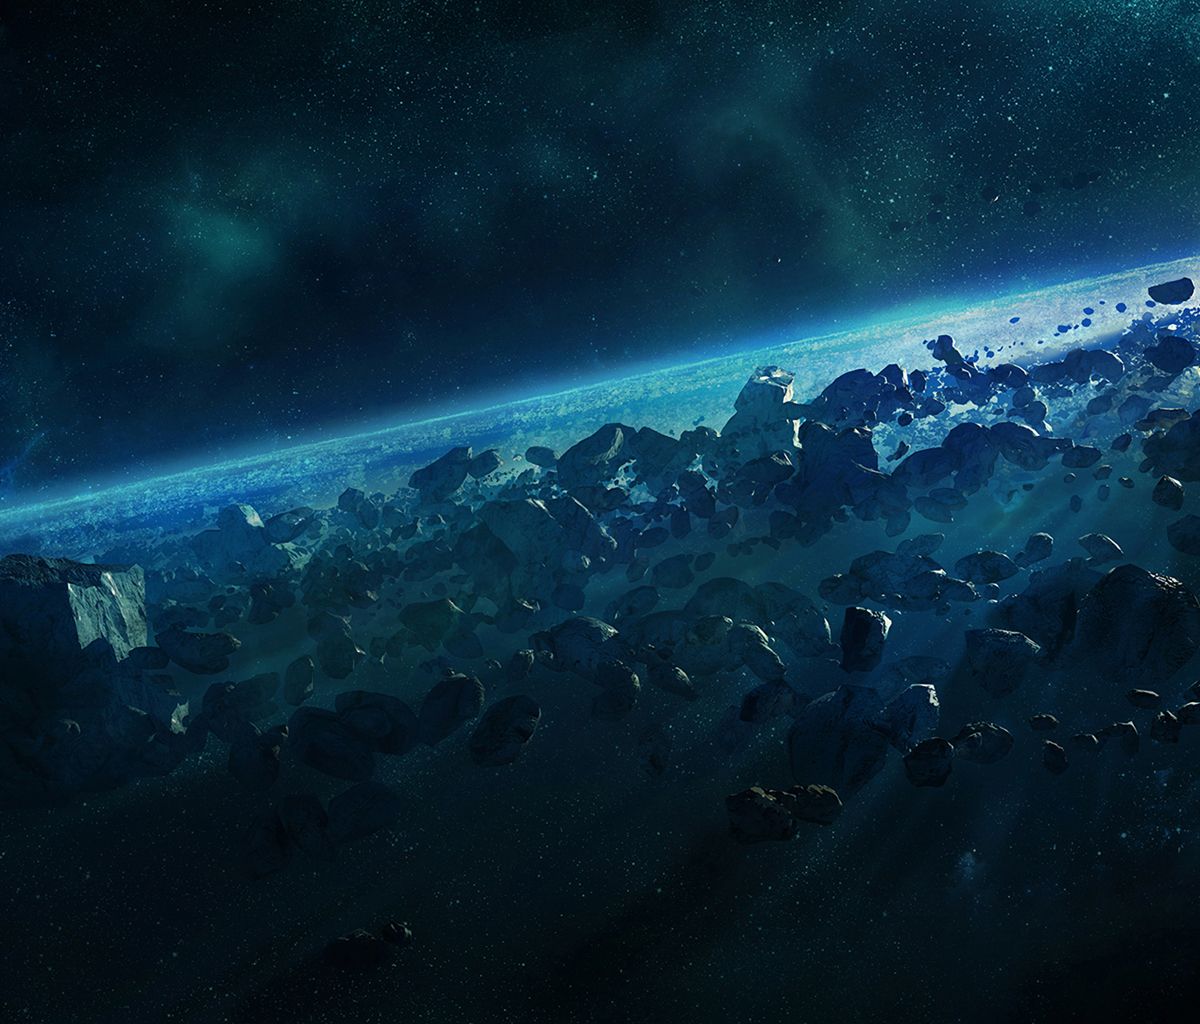 Wallpaper Wednesday - Asteroid